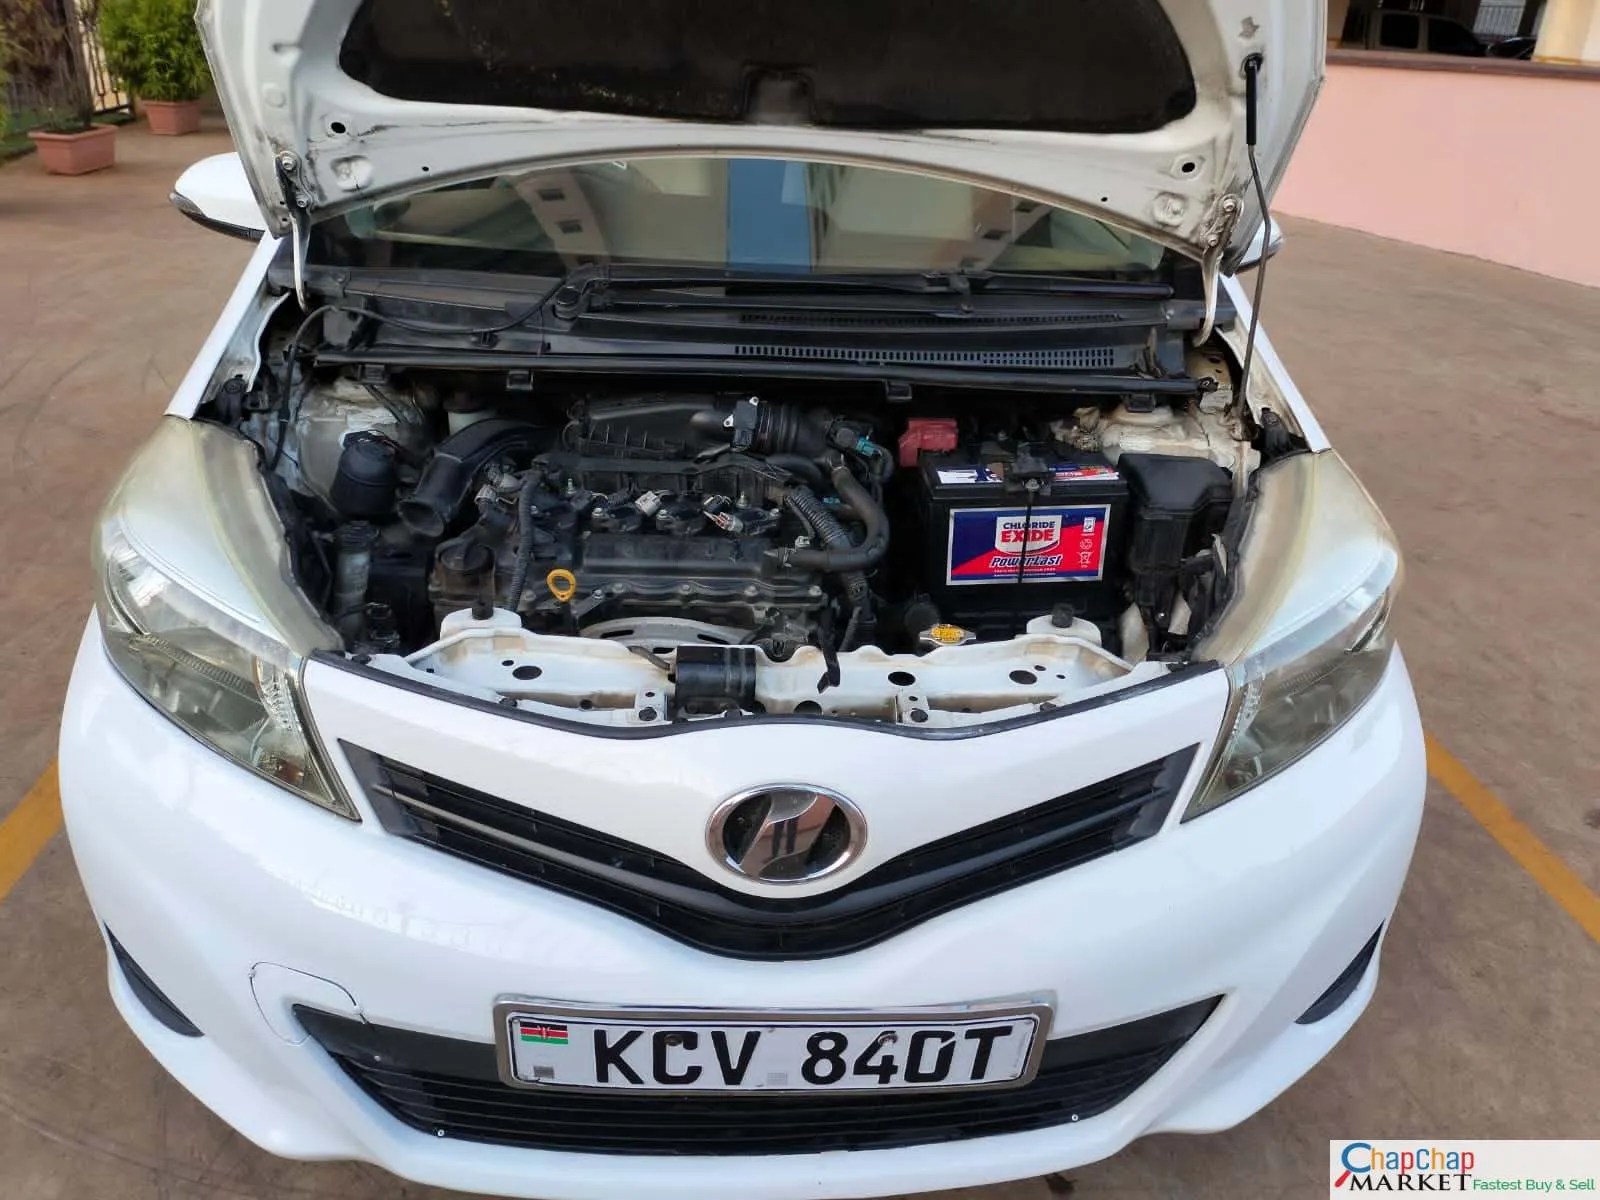 Toyota Vitz kenya 1300cc You Pay 30% Deposit Trade in OK EXCLUSIVE vitz for sale in kenya hire purchase installments 🔥